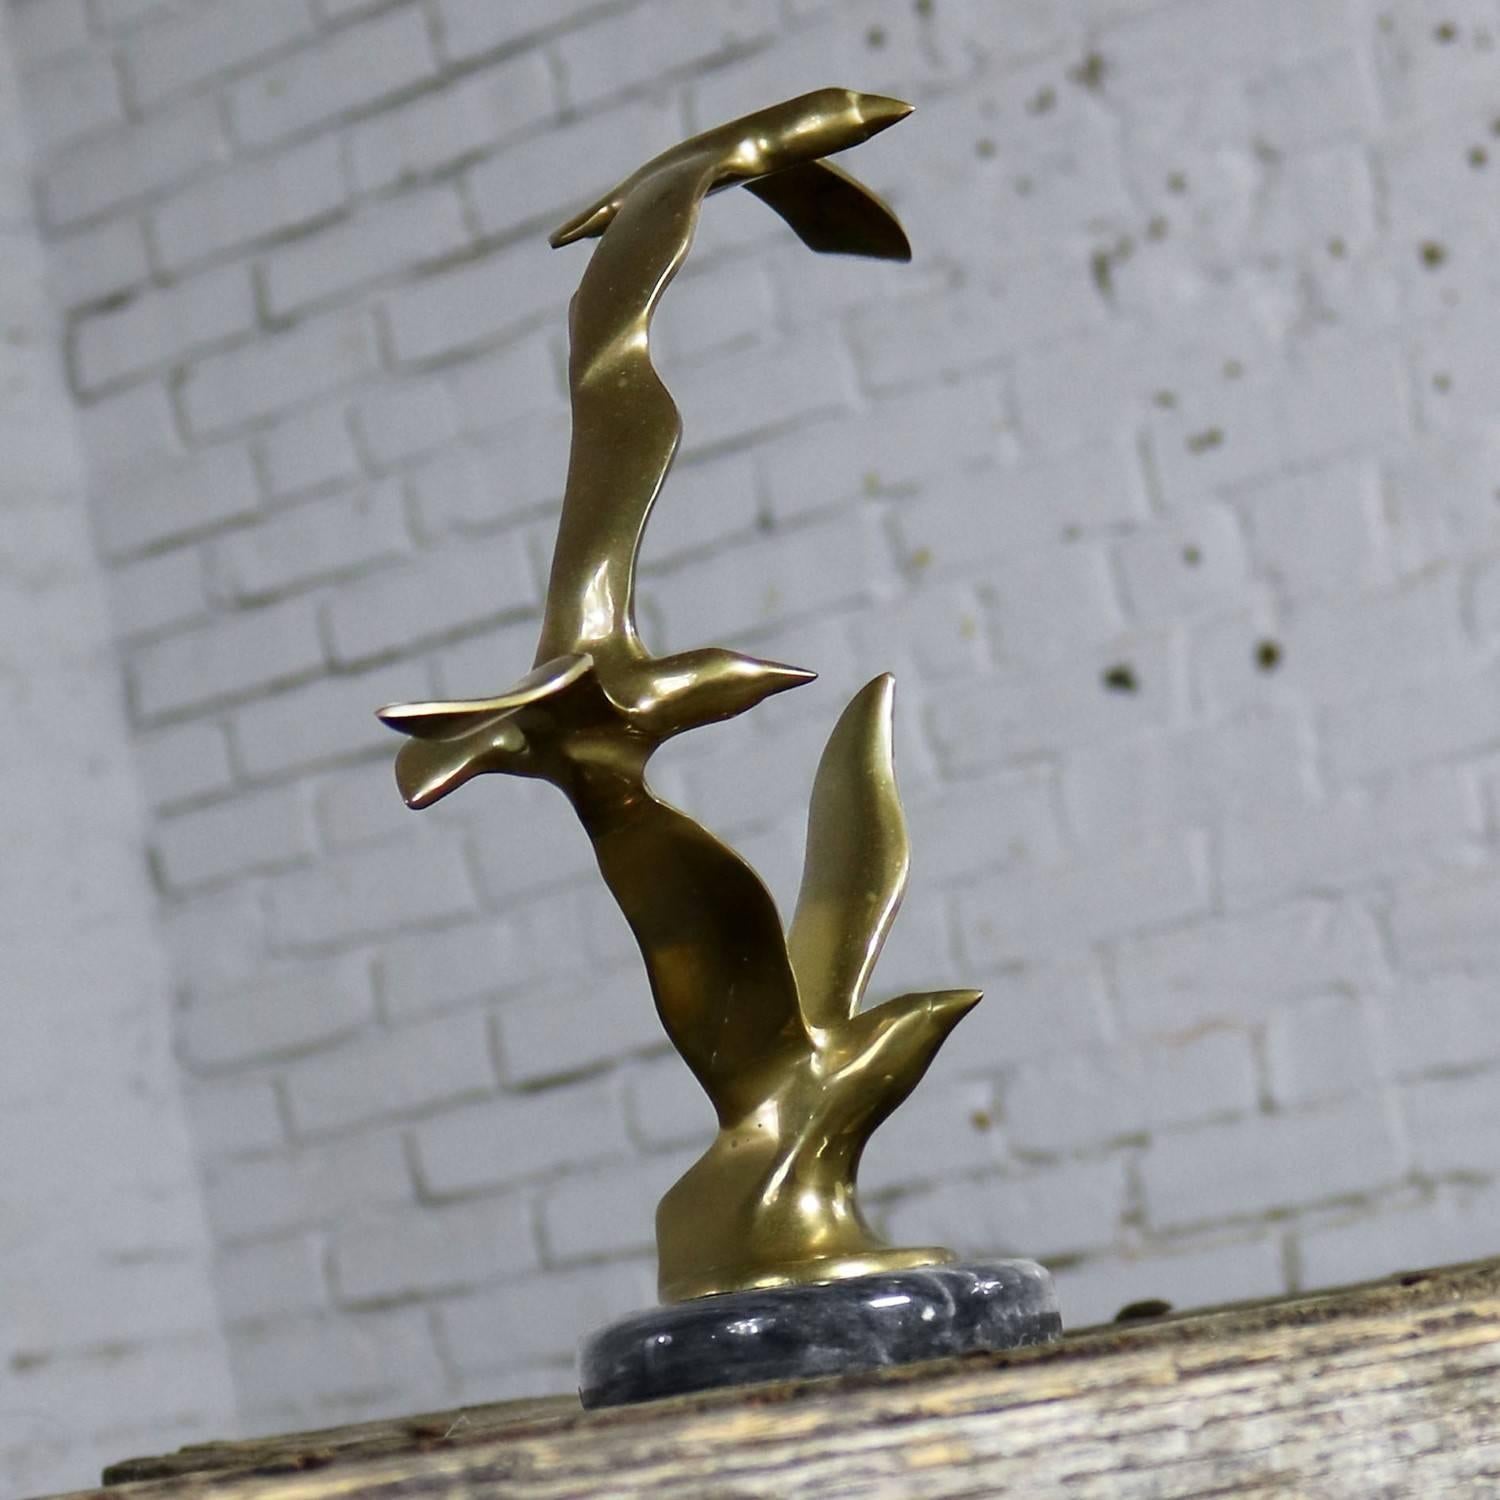 Mid-Century Modern three birds in flight brass sculpture on a round black marble base in the style of C. Jere. This one is unsigned. In great vintage condition, circa 1960s-1980s.

Awesome flock of seagulls! This birds in flight brass and black